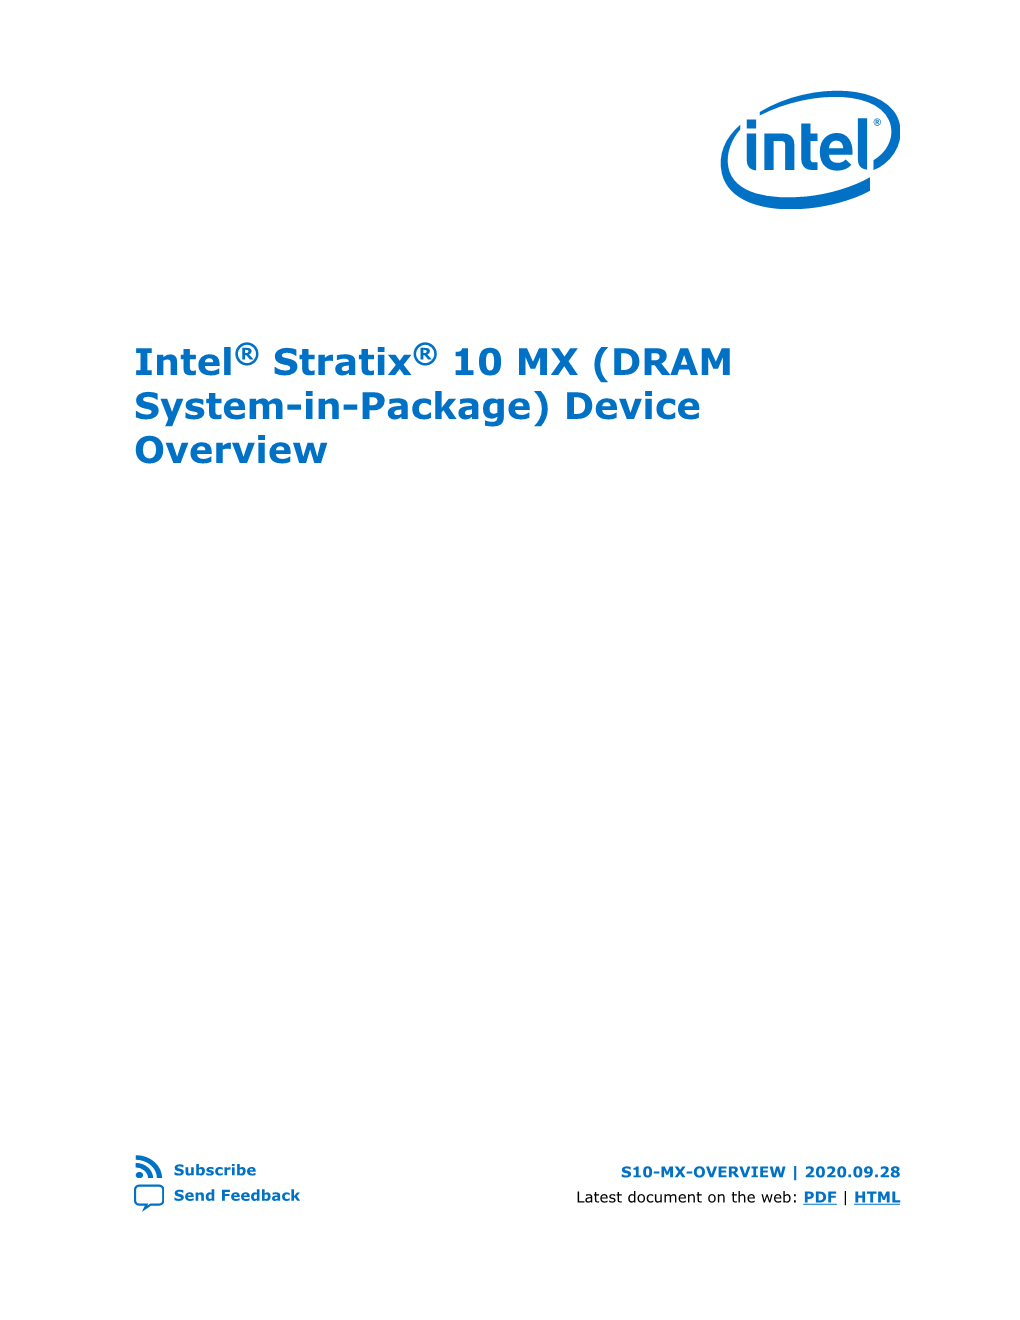 Intel® Stratix® 10 MX (DRAM System-In-Package) Device Overview